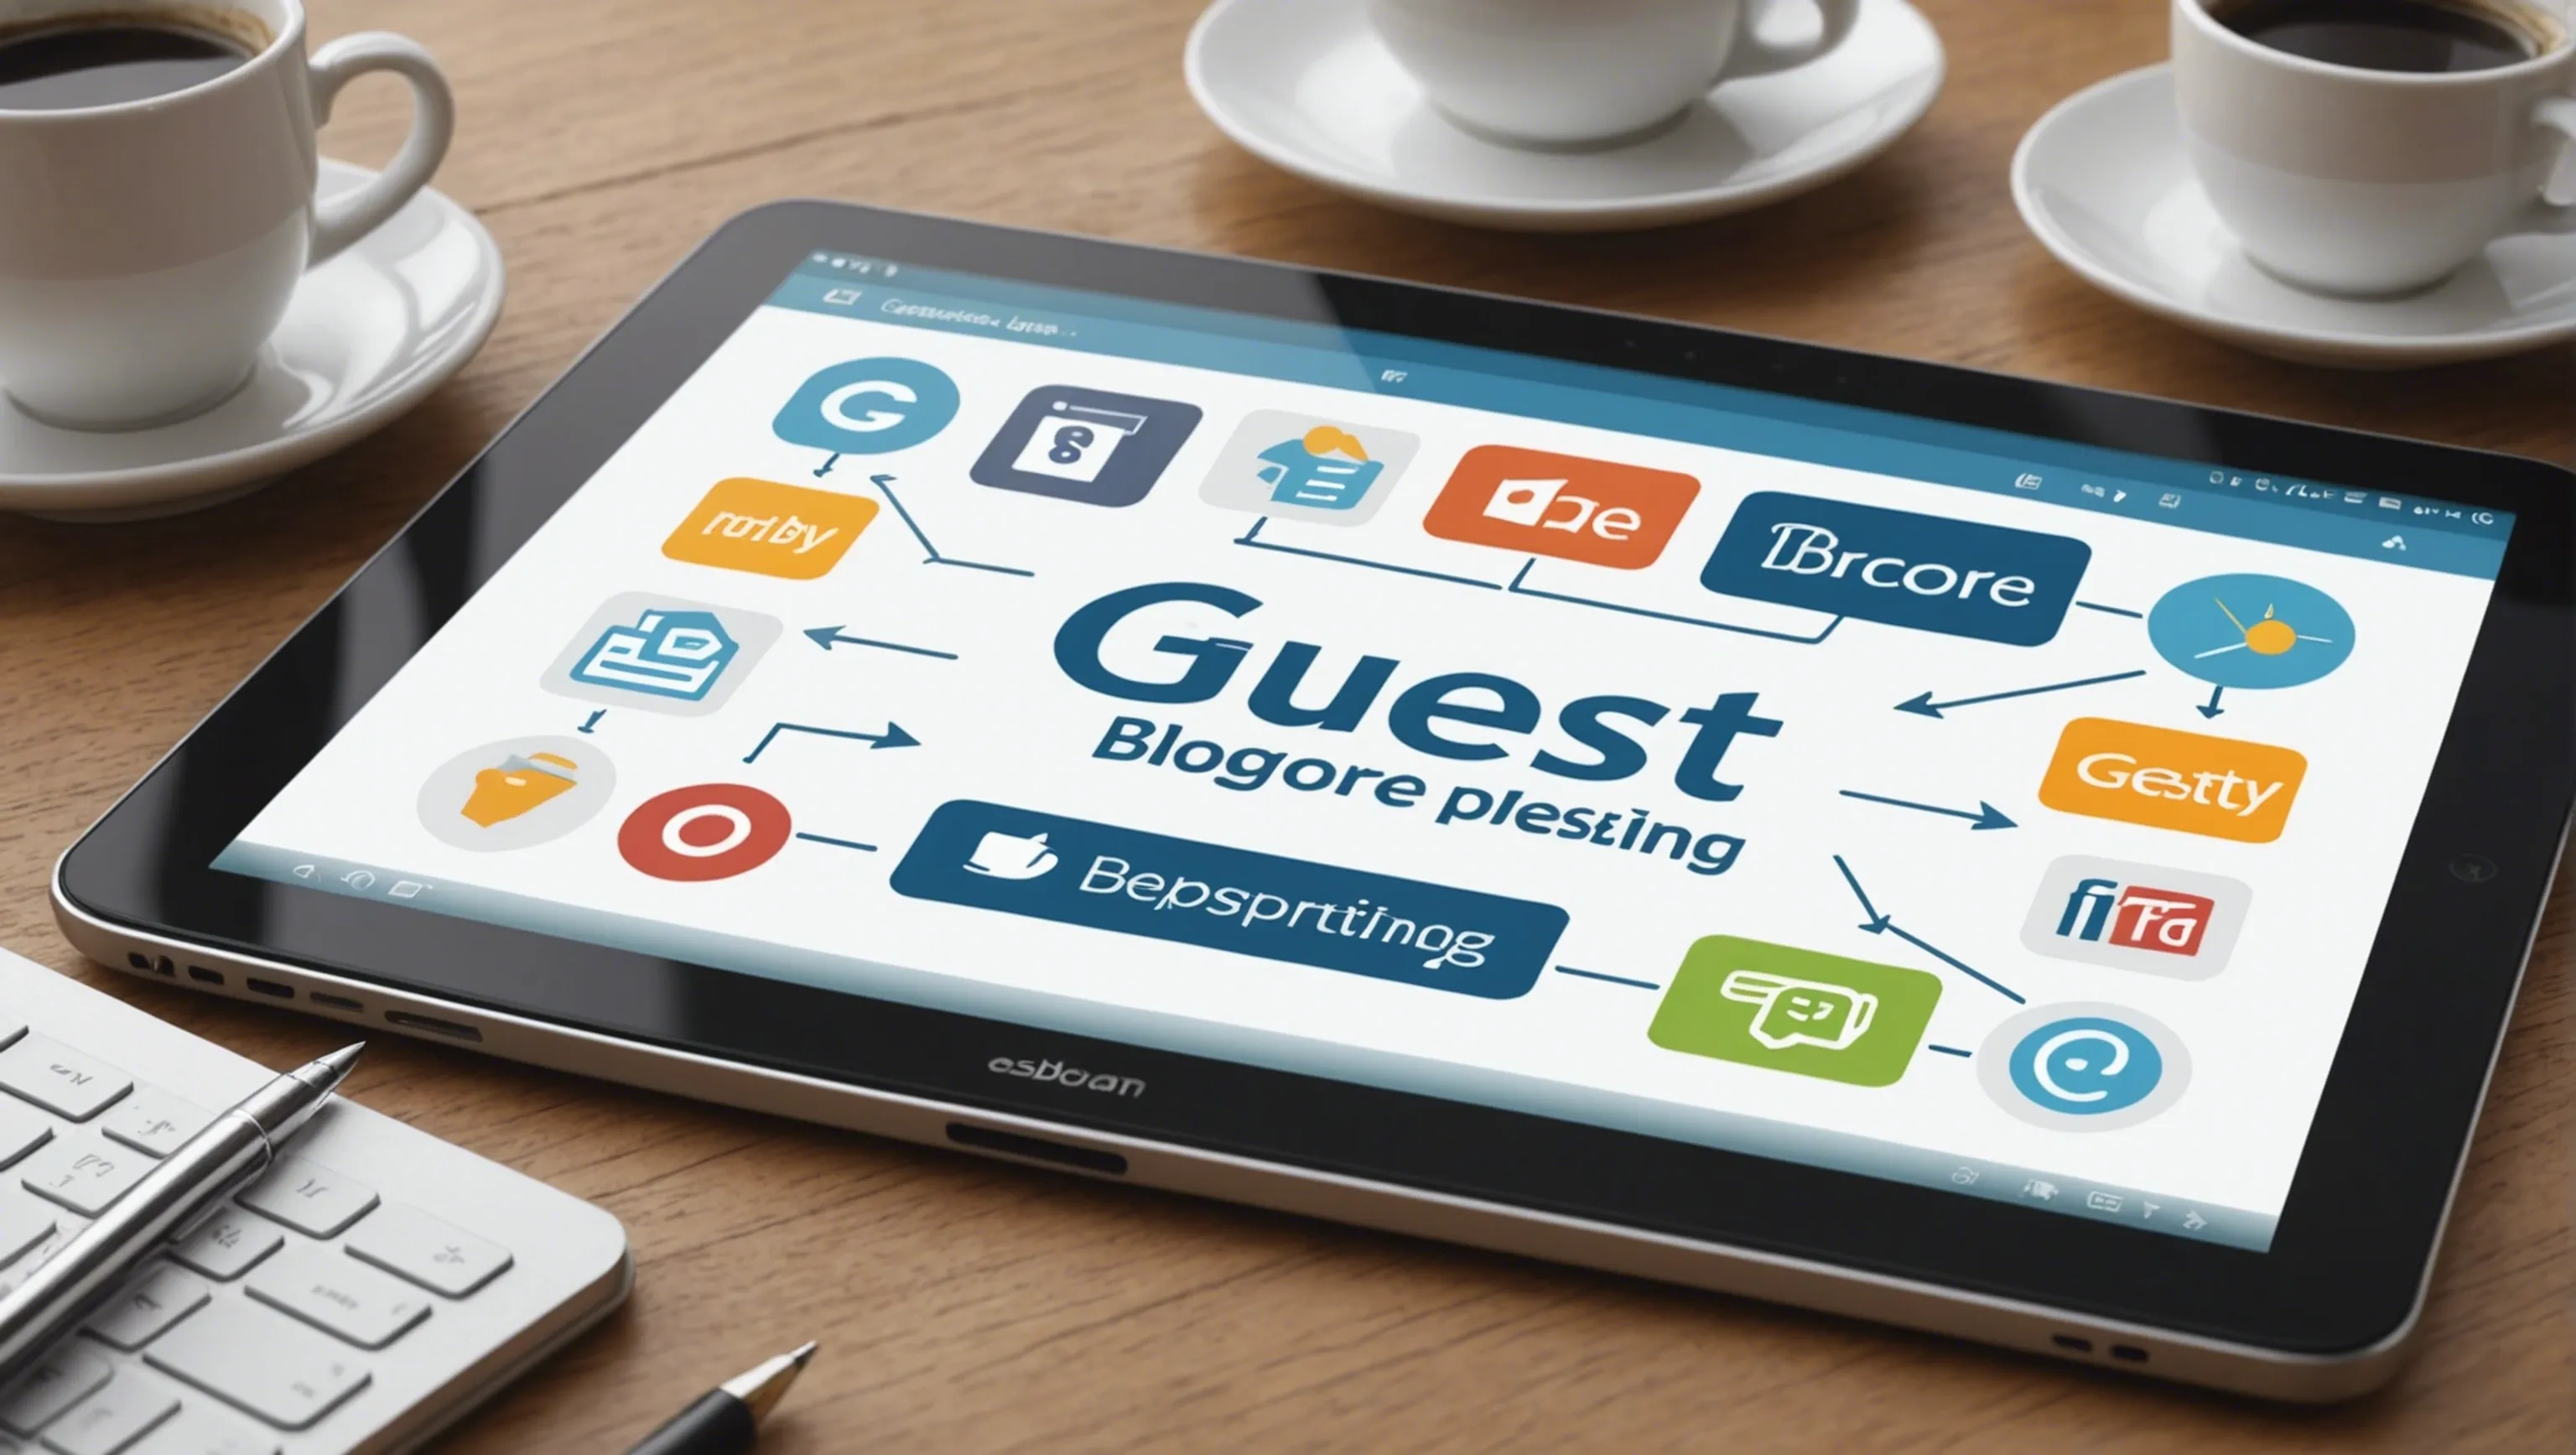 Enhanced online visibility and brand exposure through guest blogging